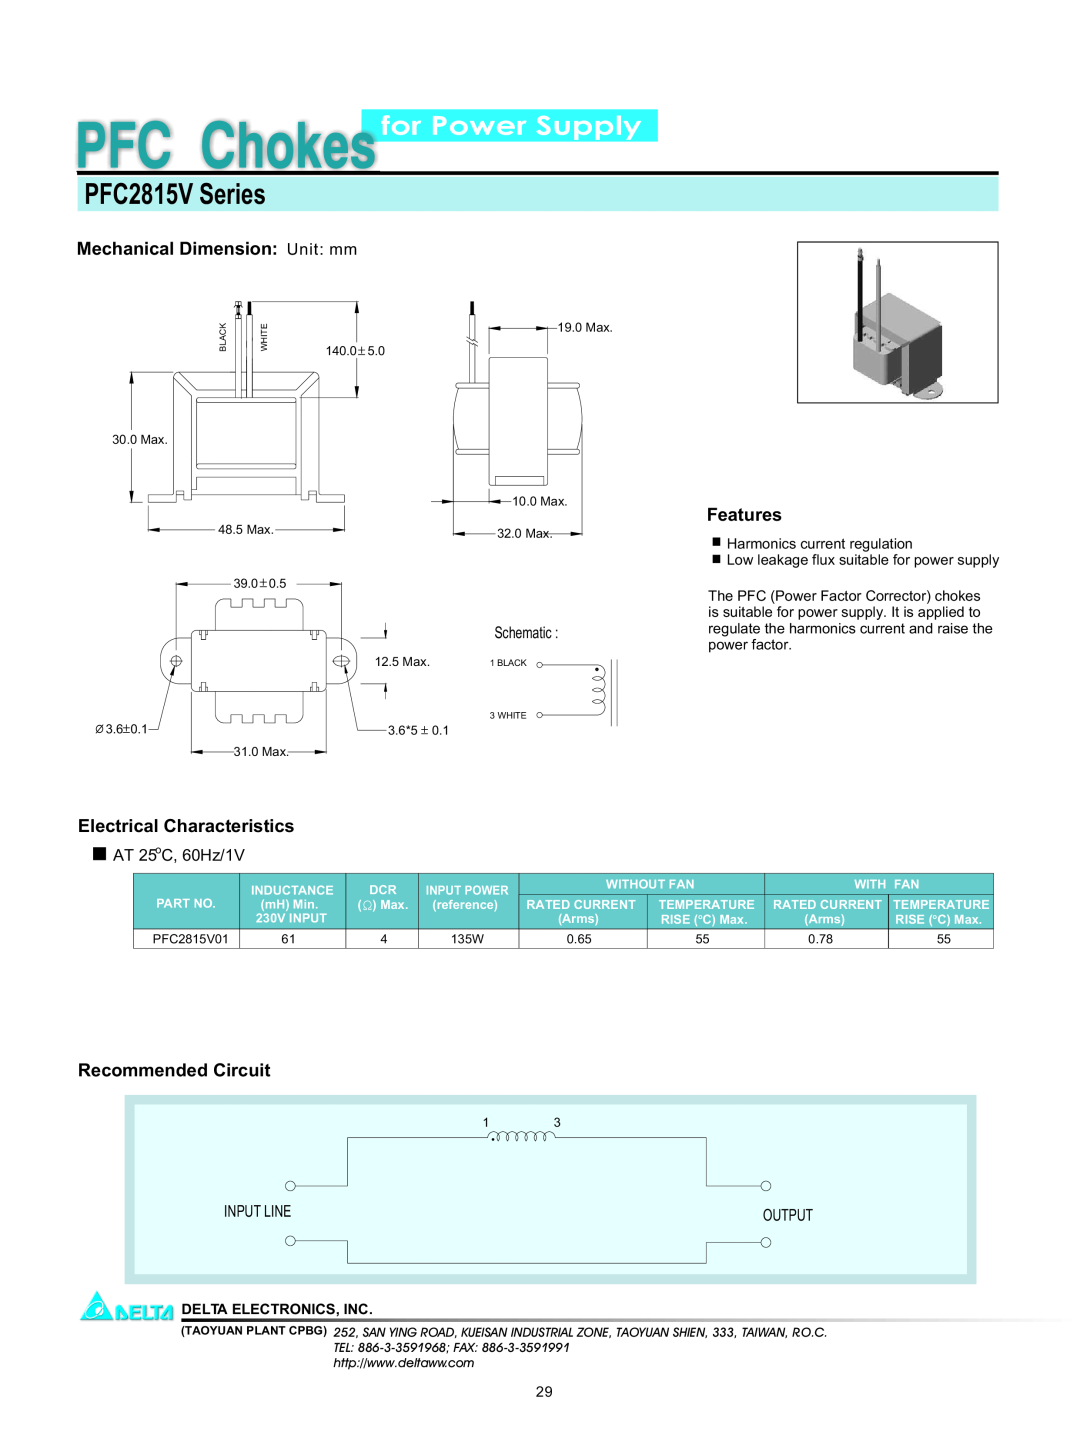 Delta Electronics PFC2815V Series manual for Power Supply, Mechanical Dimension Unit mm, Features, Recommended Circuit 